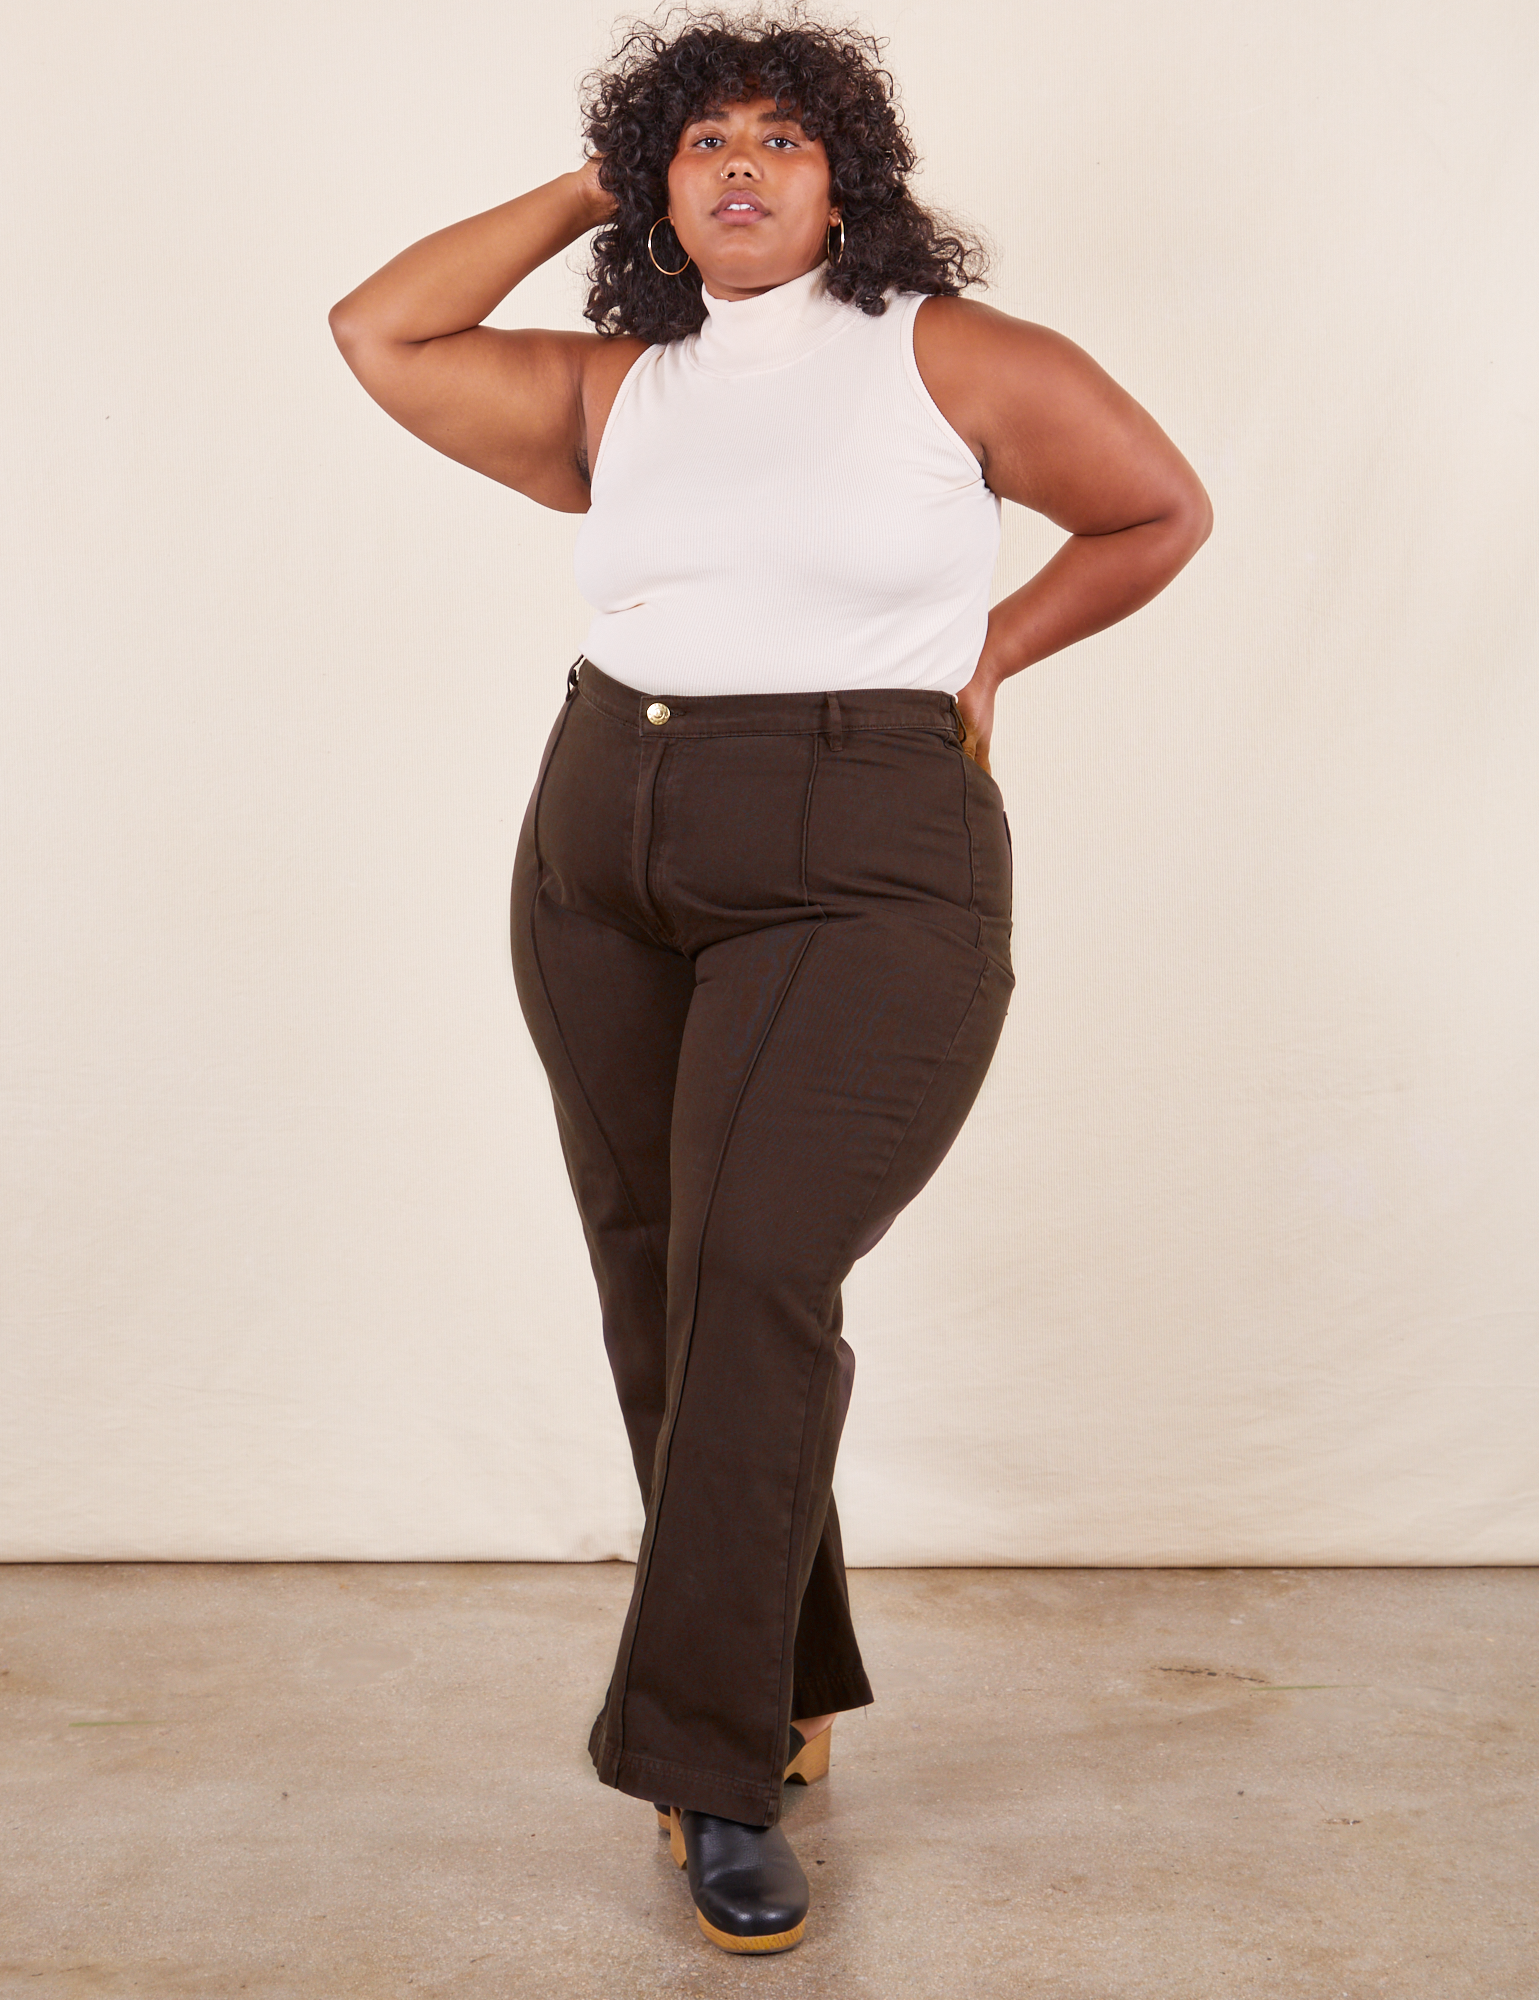 Morgan is 5&#39;5&quot; and wearing 1XL Western Pants in Espresso Brown paired with vintage off-white Sleeveless Turtleneck